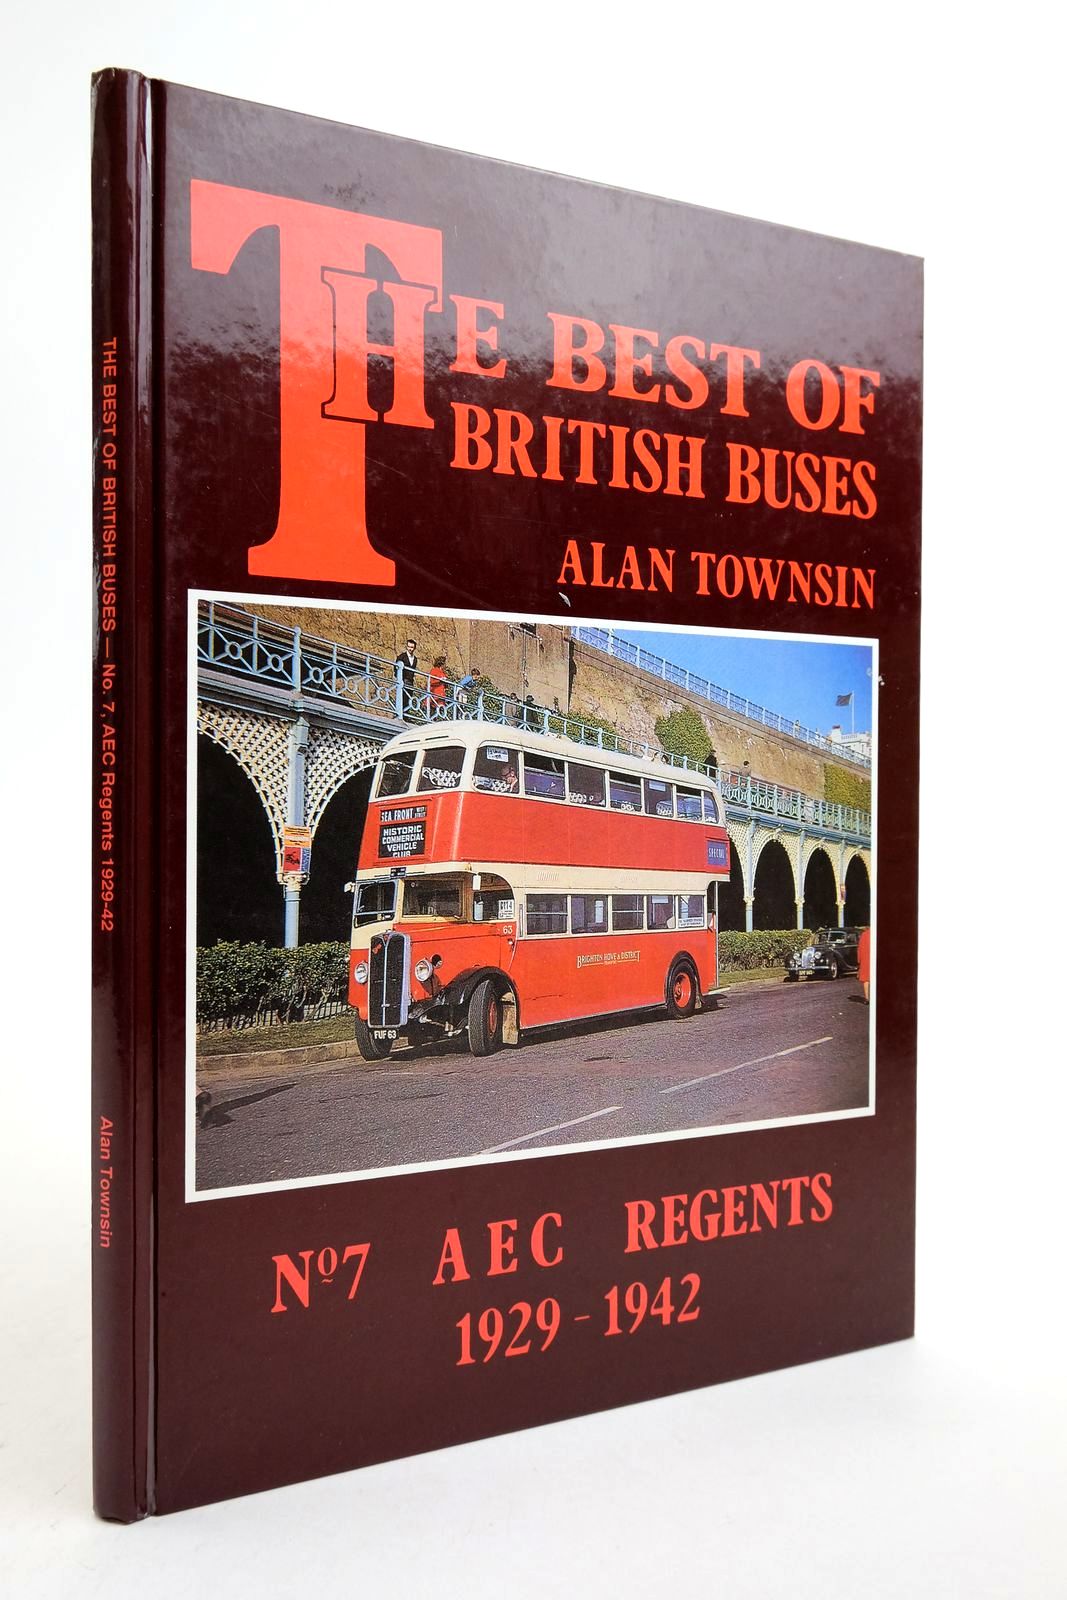 Photo of THE BEST OF BRITISH BUSES No. 7 AEC REGENTS 1929-1942- Stock Number: 2139659